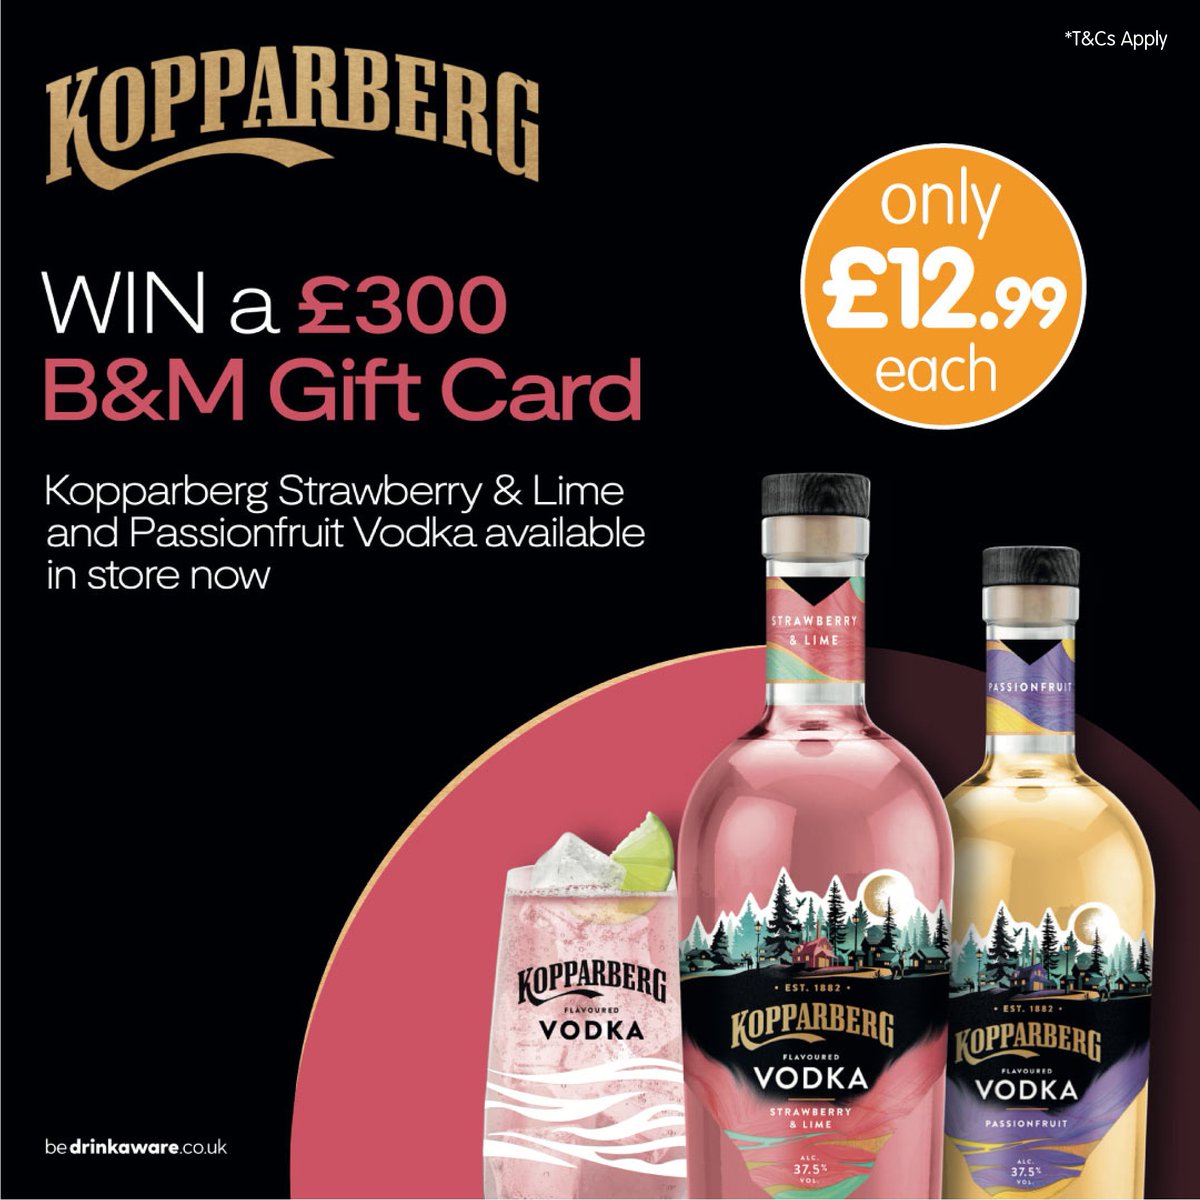 🥃#COMPETITION🥃 Did you know @KopparbergUK flavoured vodkas are available in B&M? We're giving 1 winner a chance to #WIN a £300 B&M Gift Card! For a chance to WIN 1) FLW 2) RT 3) COMMENT #BMKopparberg Ends 9am 6/03/23 🔞Please drink responsibly; drinkaware.co.uk